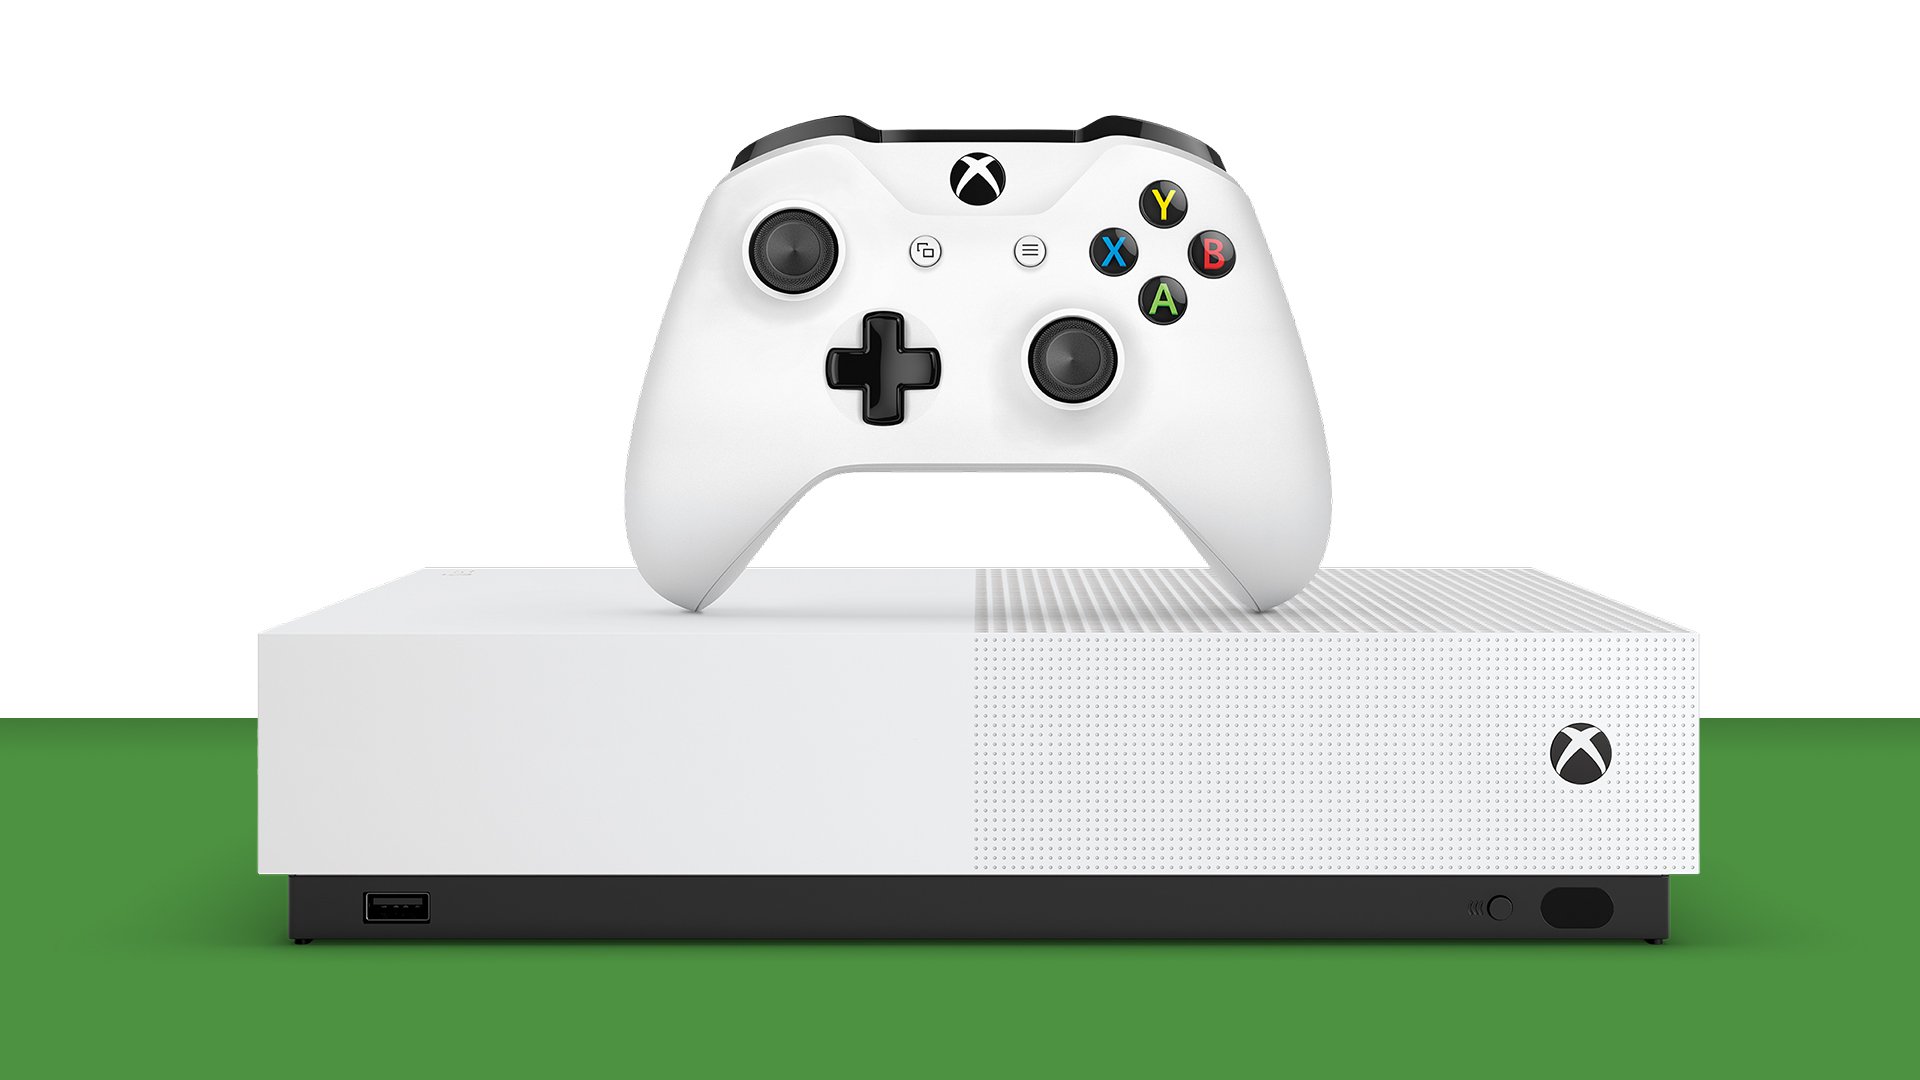 zacht draadloos trolleybus What is the Xbox One S All-Digital Edition price? | Windows Central